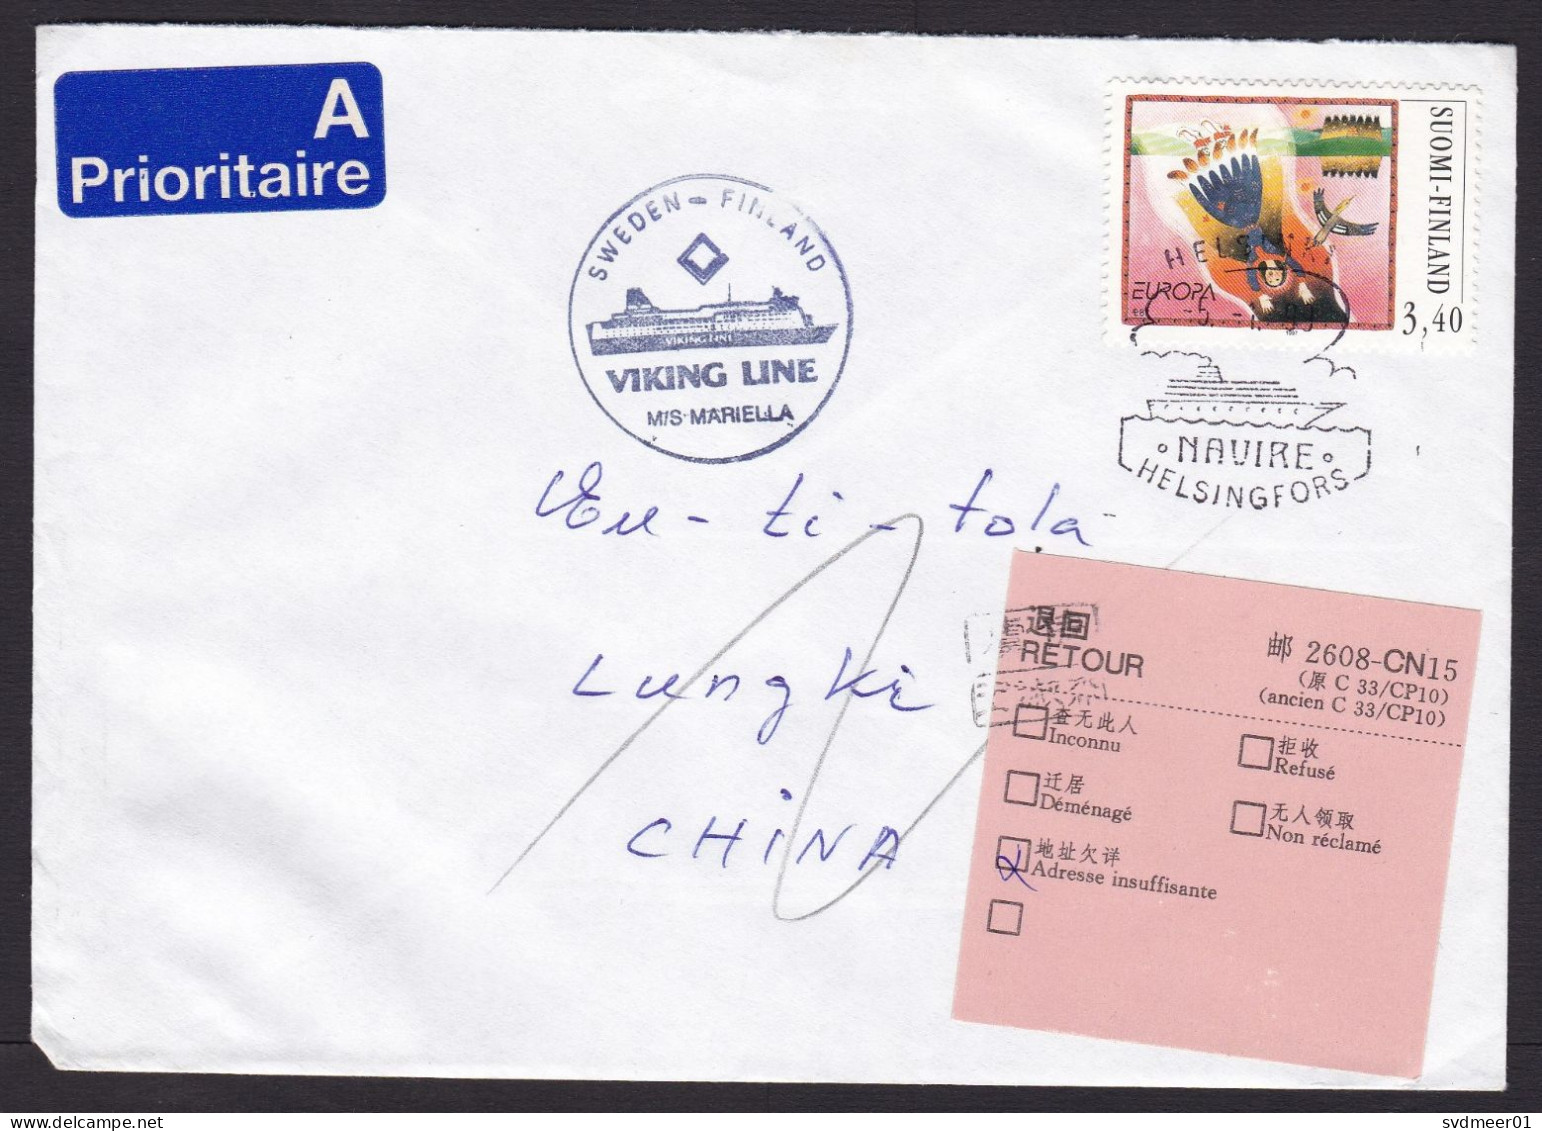 Finland: Cover To China, 1999, 1 Stamp, Ship Cancel Viking Line, Returned, CN15 Retour Label (traces Of Use) - Covers & Documents